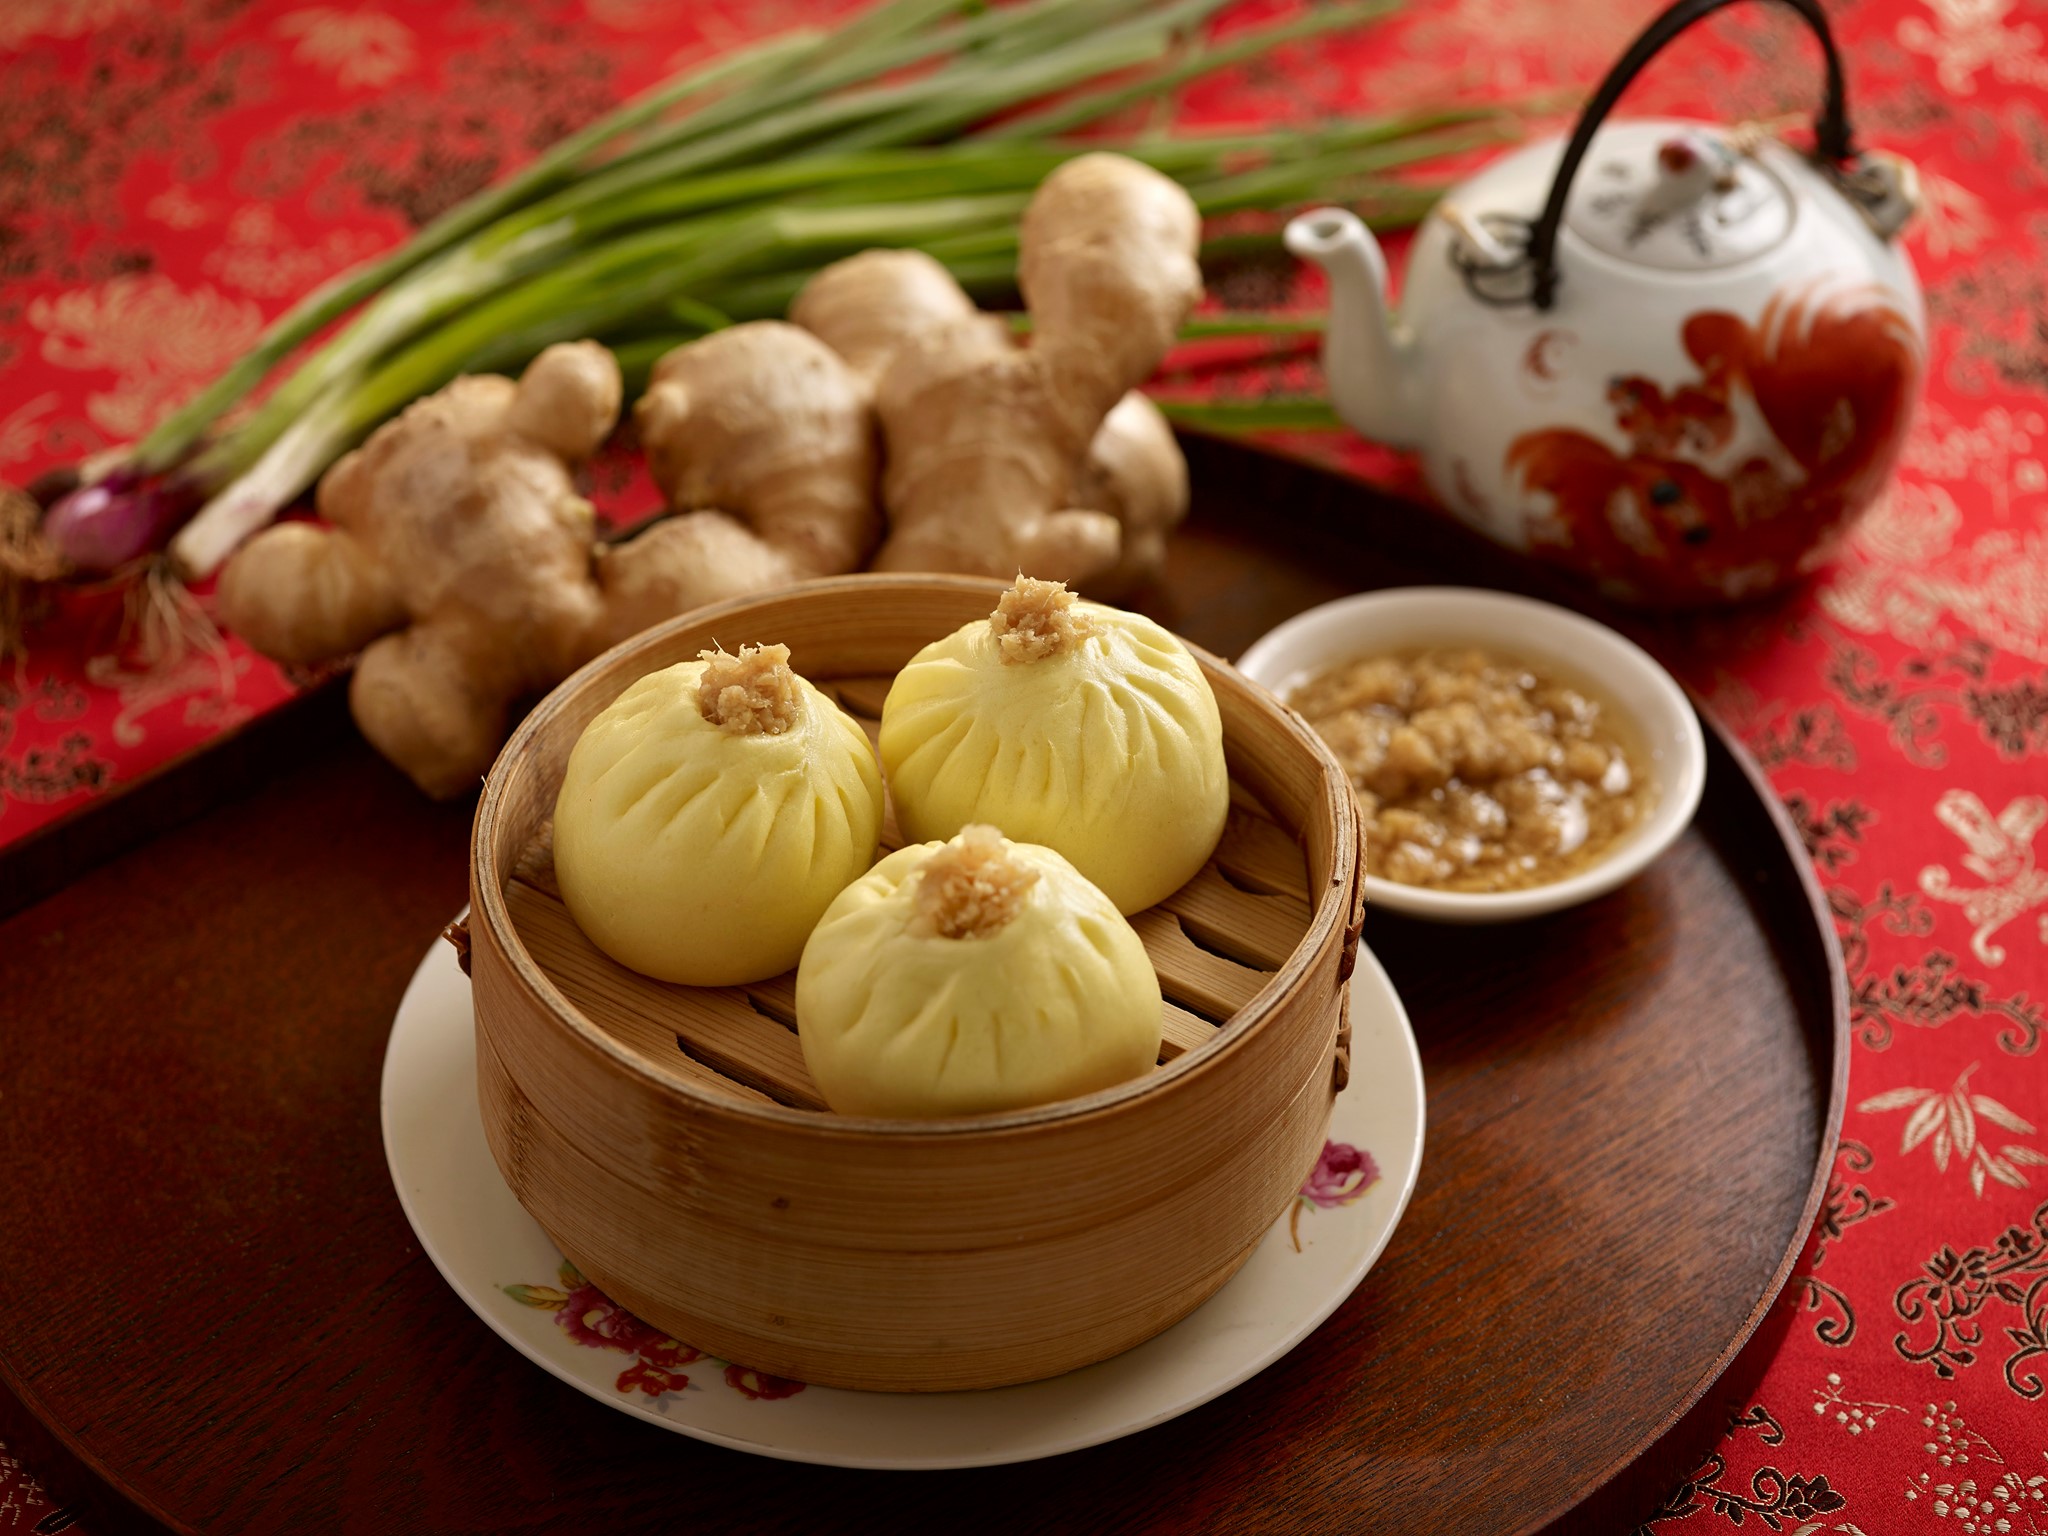 $19.90++ All-You-Can-Eat Dim Sum Buffet Promo at Soup Restaurant Changi Airport from 11 – 30 Nov 20 - 3